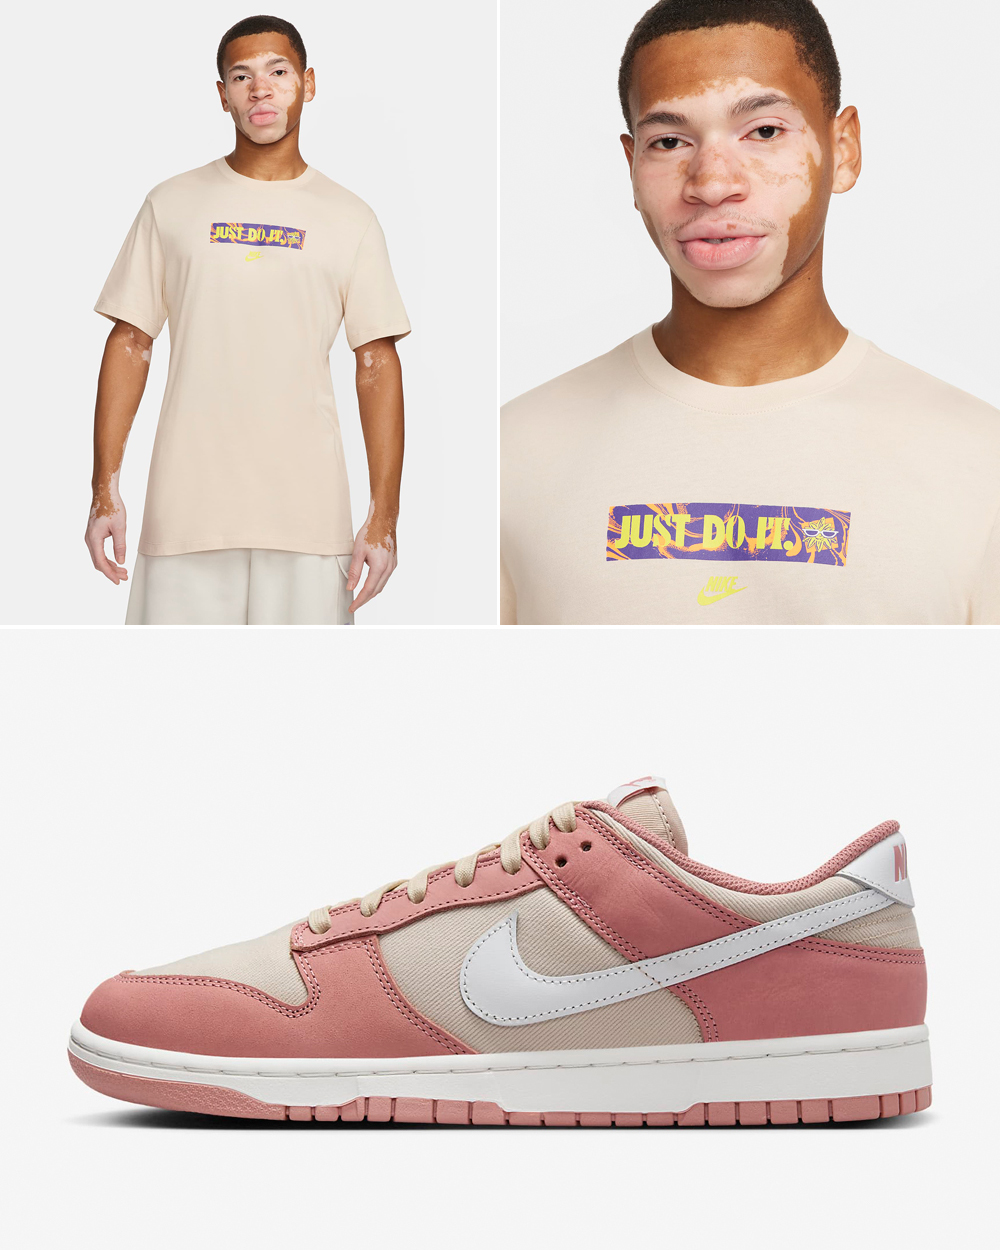 Nike-Dunk-Low-Red-Stardust-Sanddrift-T-Shirt-Matching-Outfit